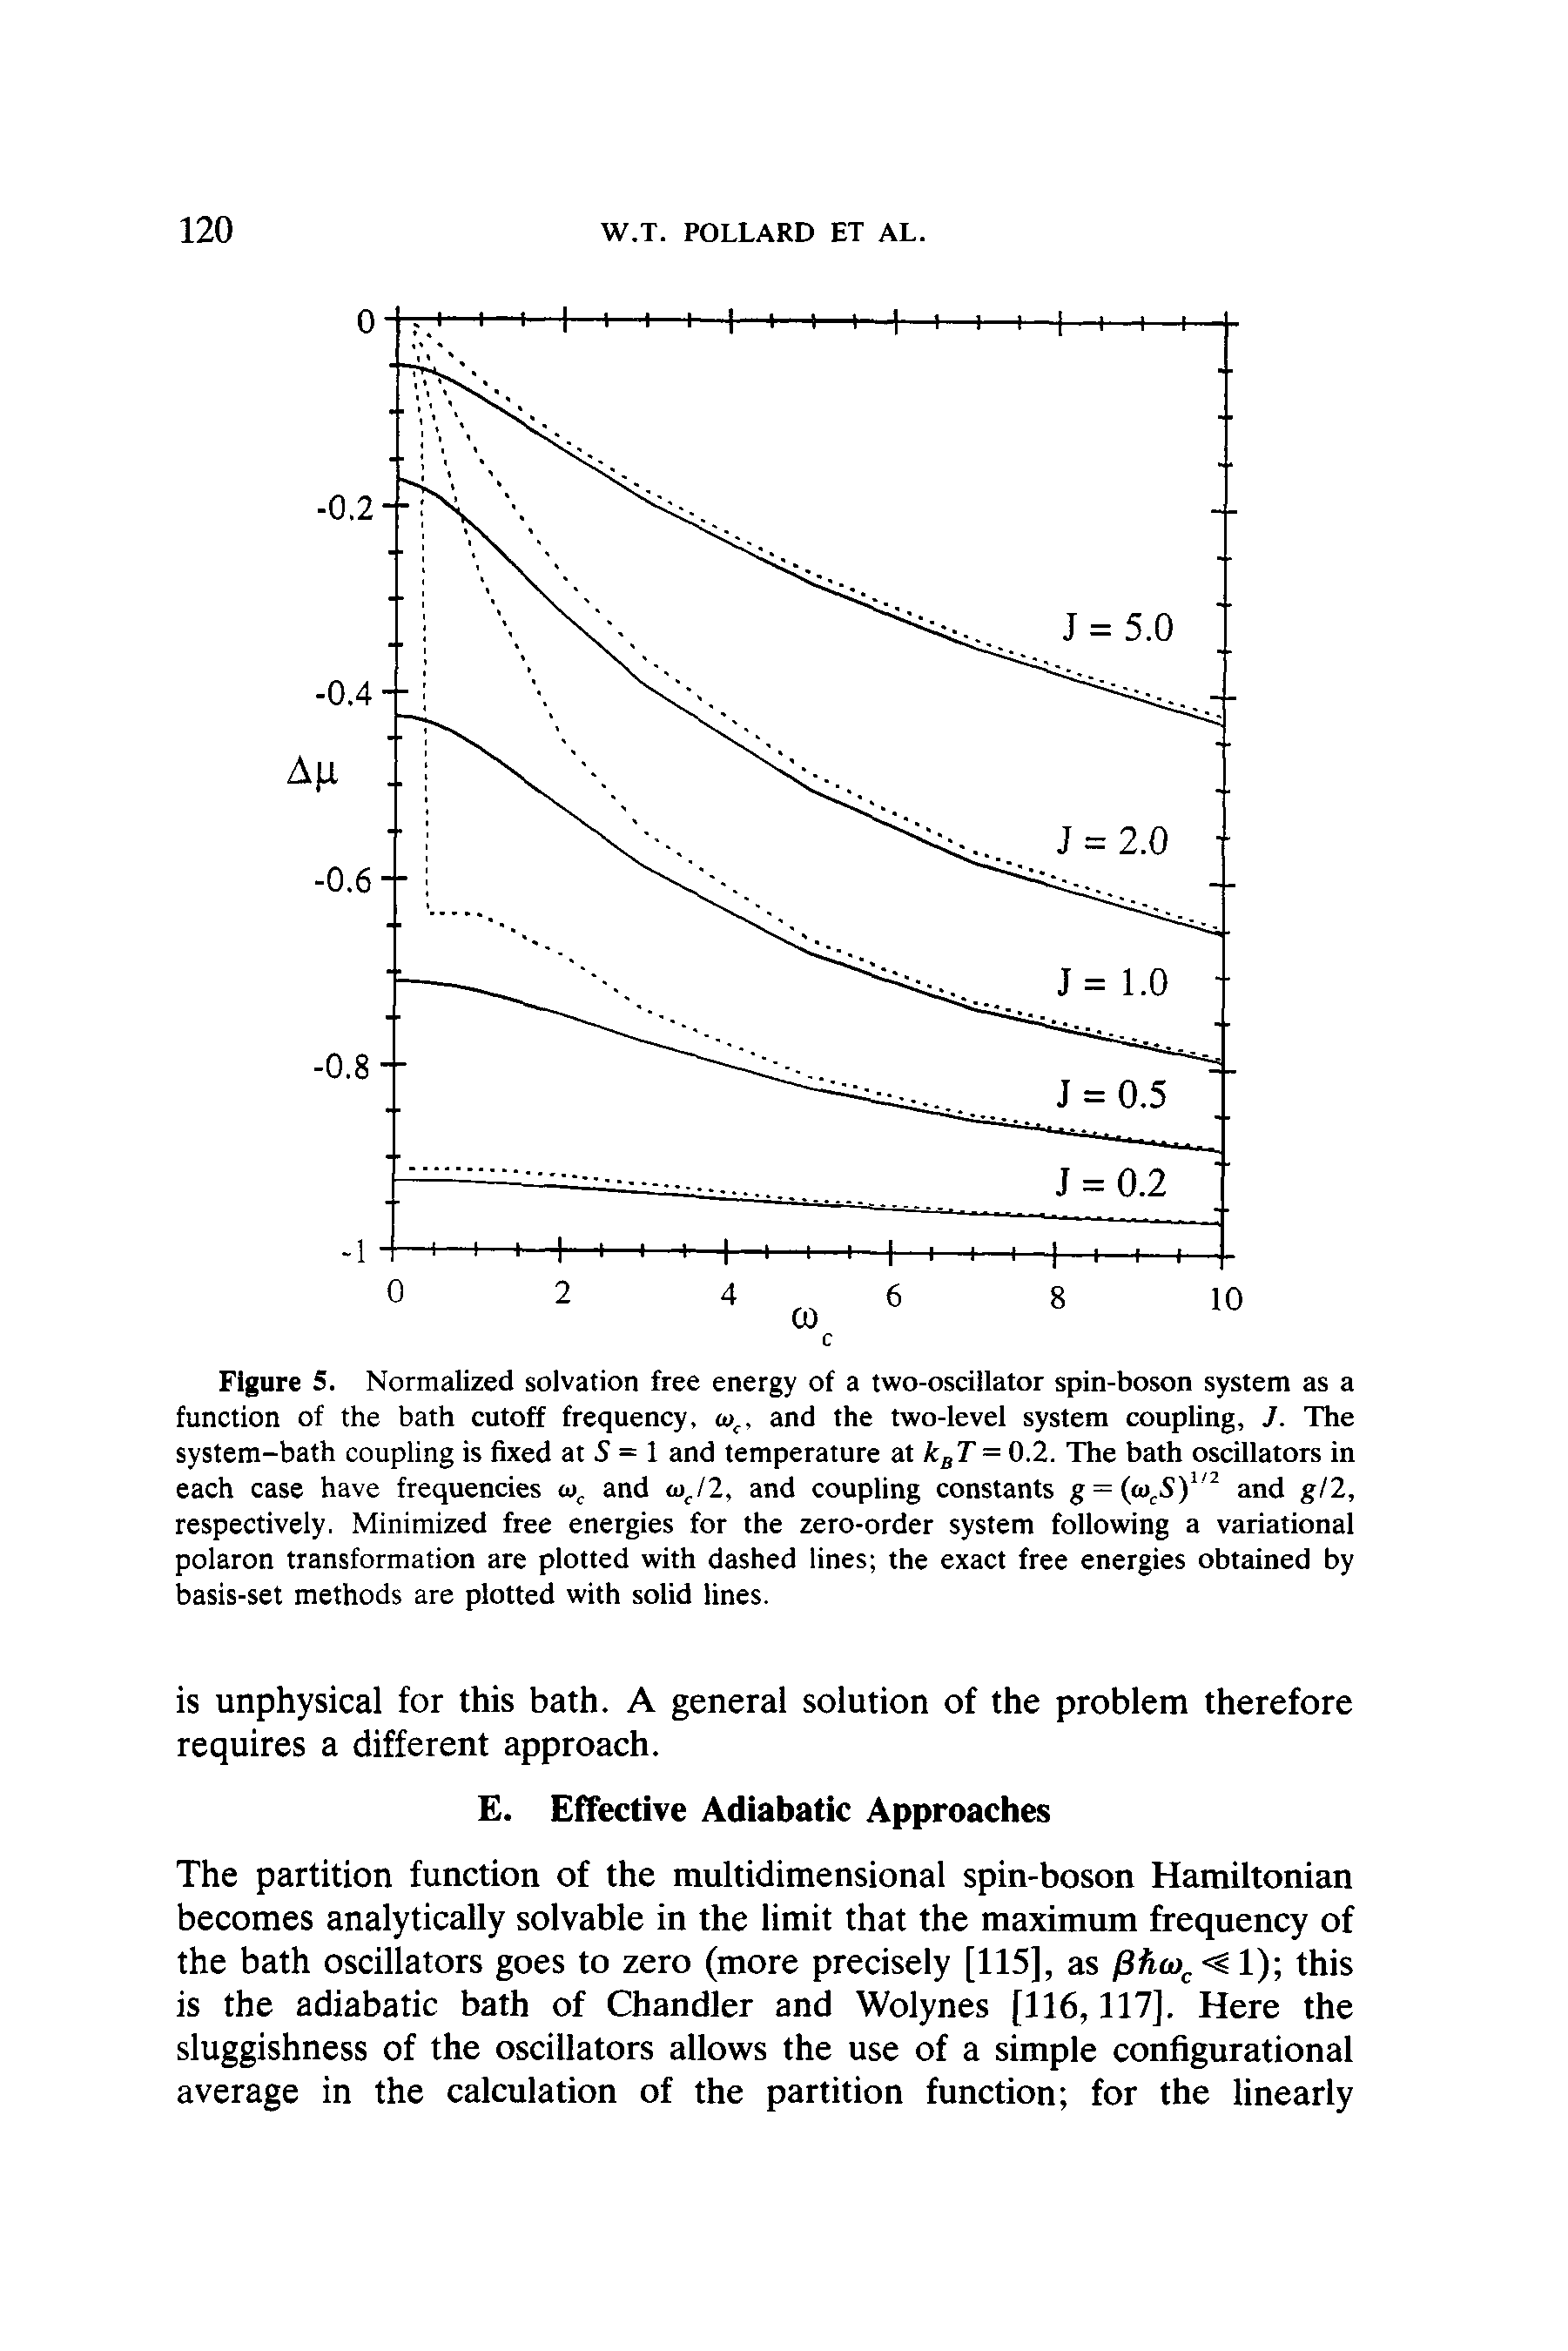 Figure 5. Normalized solvation free energy of a two-oscillator spin-boson system as a function of the bath cutoff frequency, <o, and the two-level system coupling, J. The system-bath coupling is fixed at 5 = 1 and temperature at k T = 0.2. The bath oscillators in each case have frequencies and and coupling constants g = (o)jS) and g/2,...